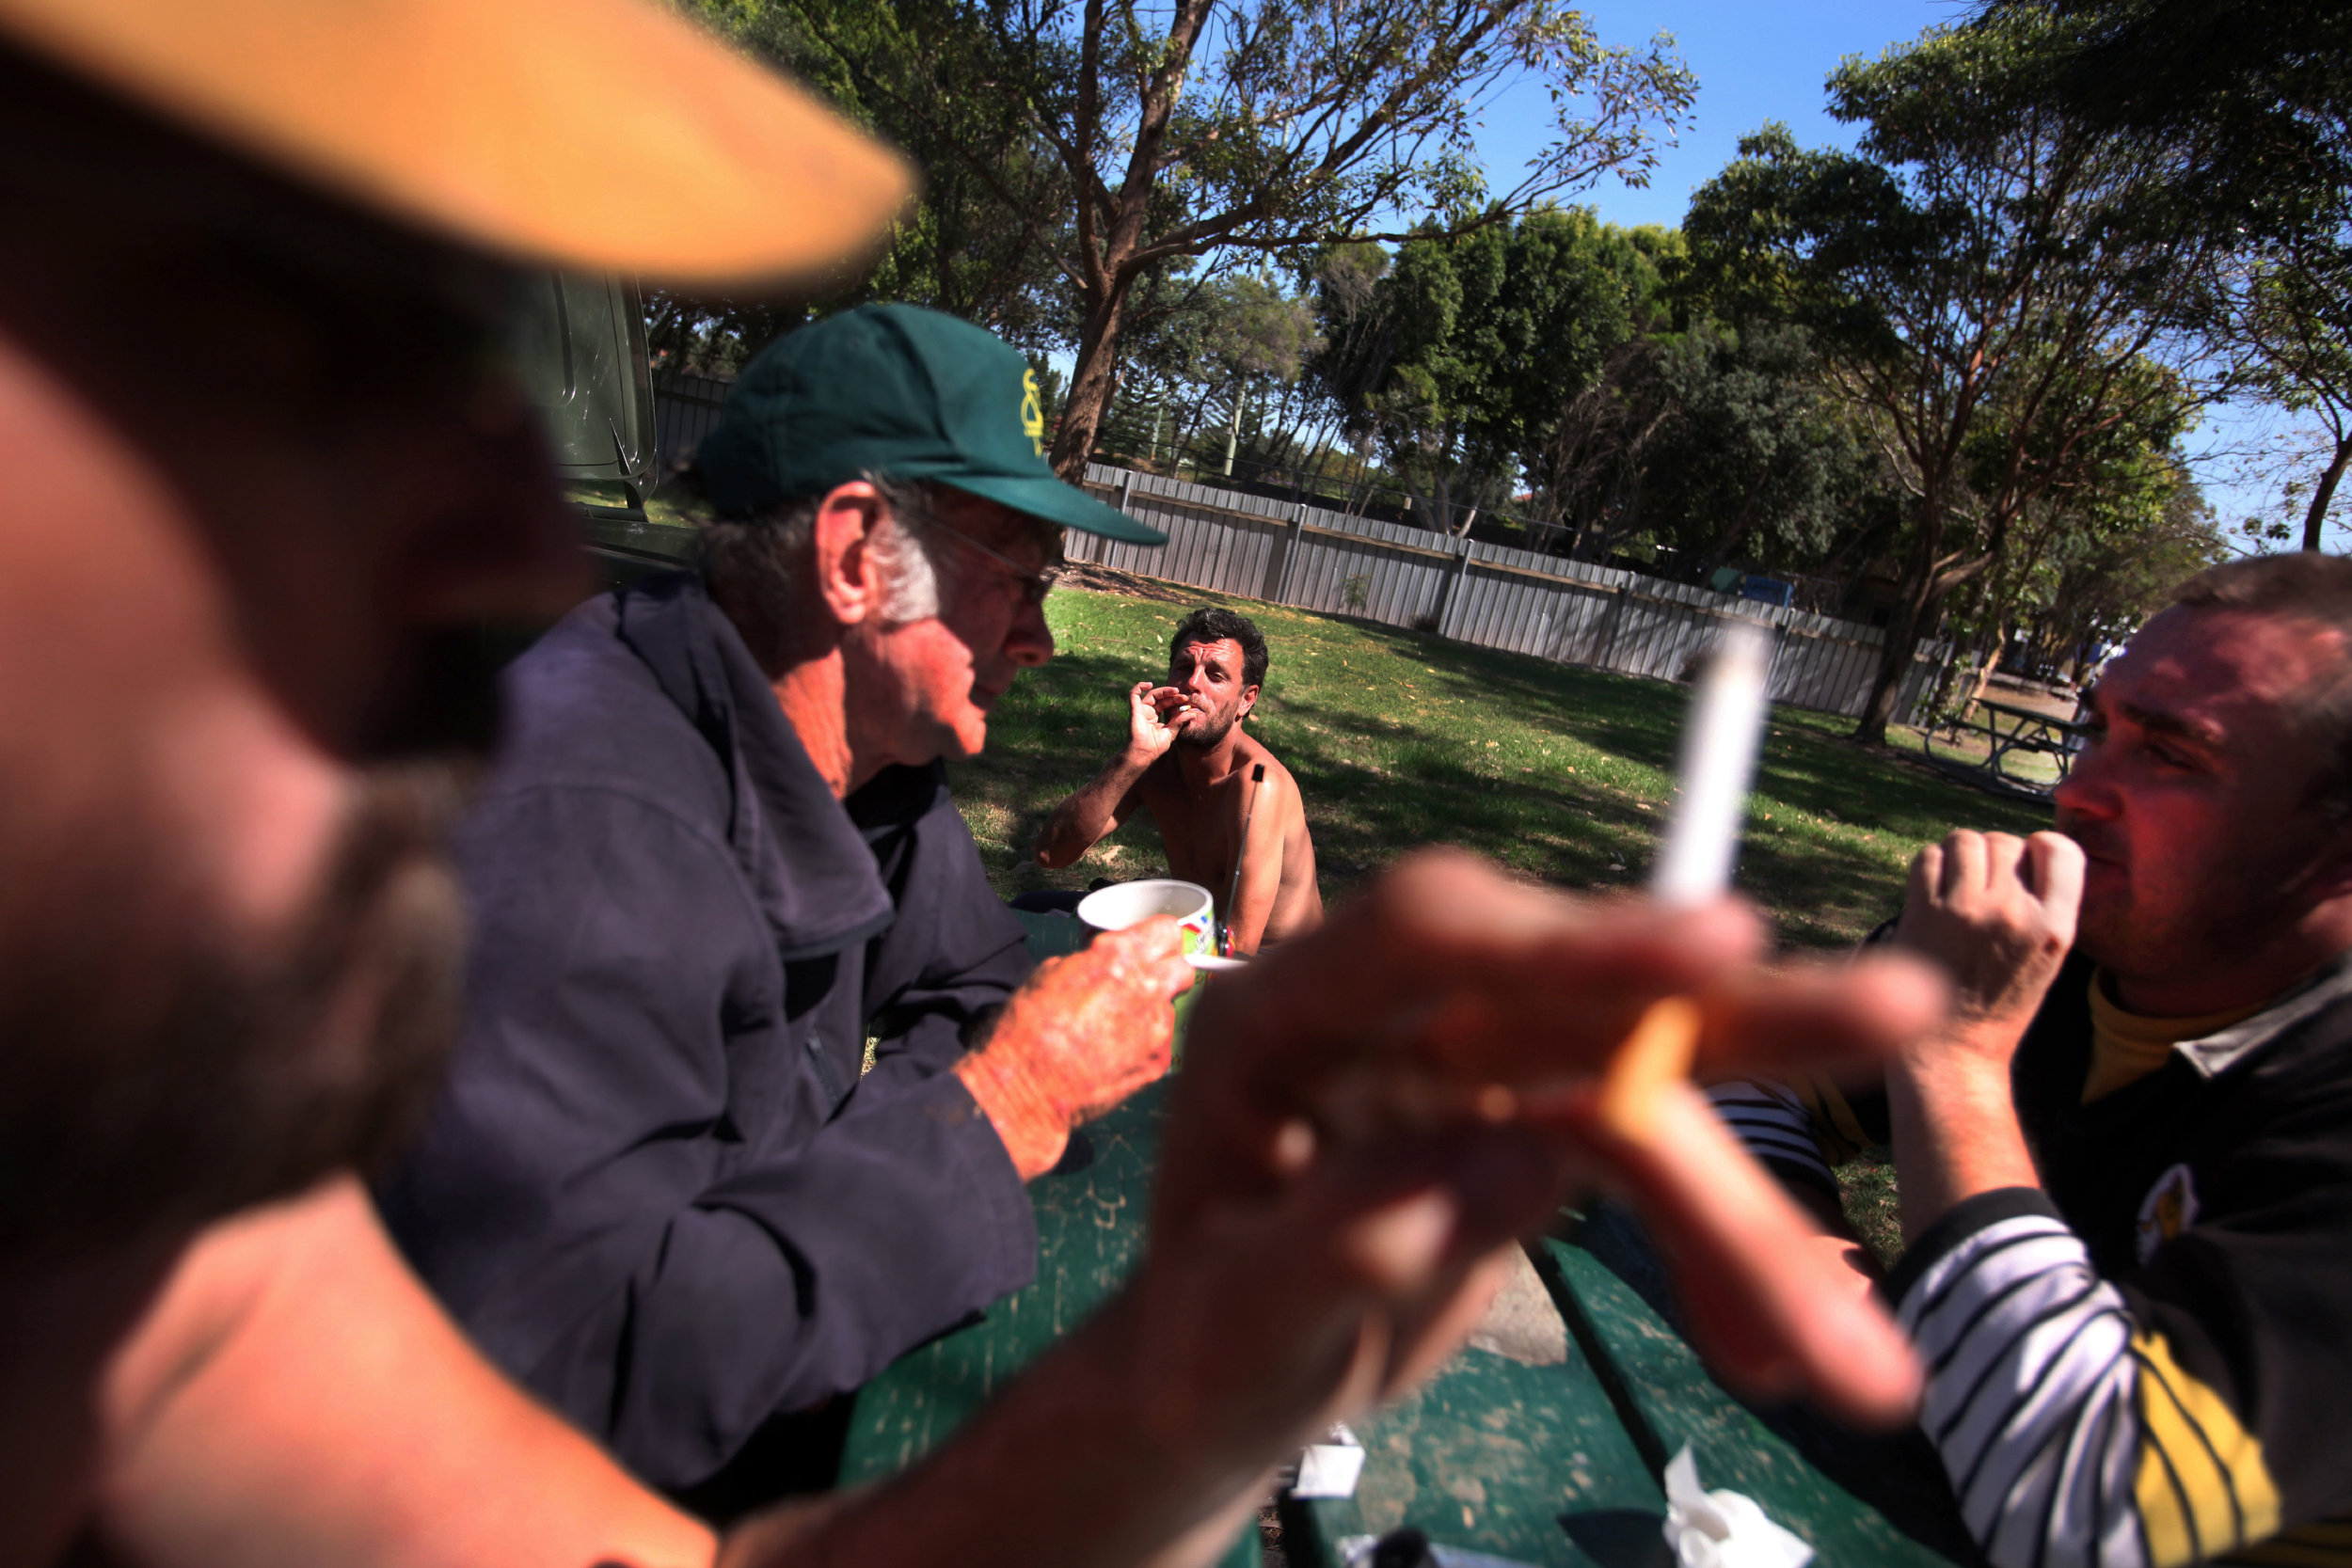 Tas (foreground and left), Dennis (Green baseball cap) drink with friends in a local park.